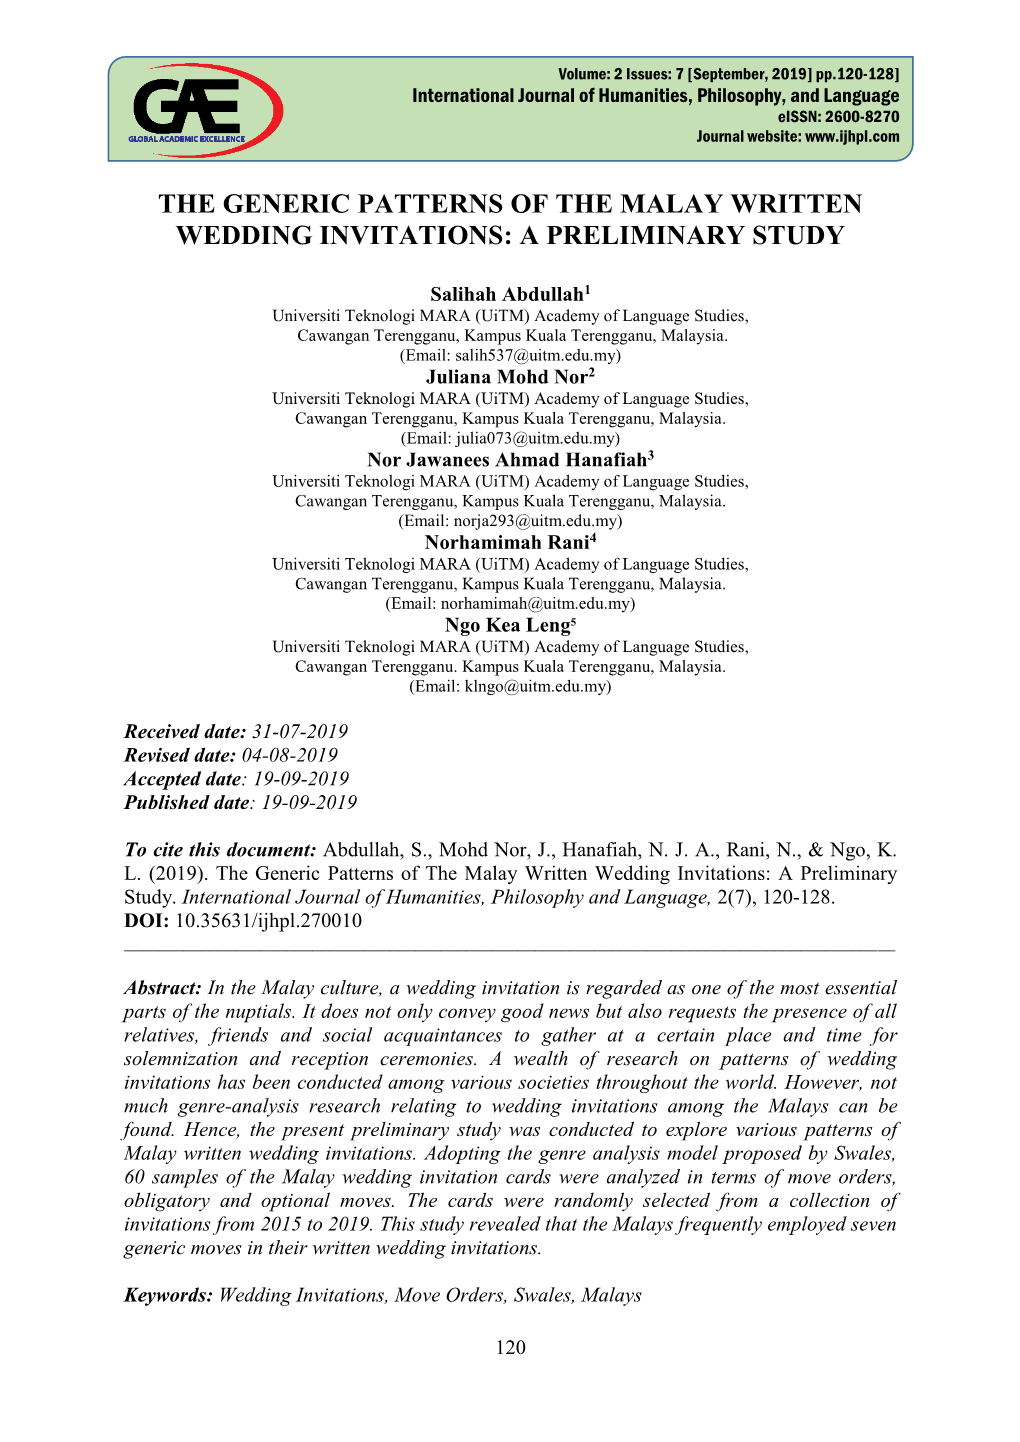 The Generic Patterns of the Malay Written Wedding Invitations: a Preliminary Study